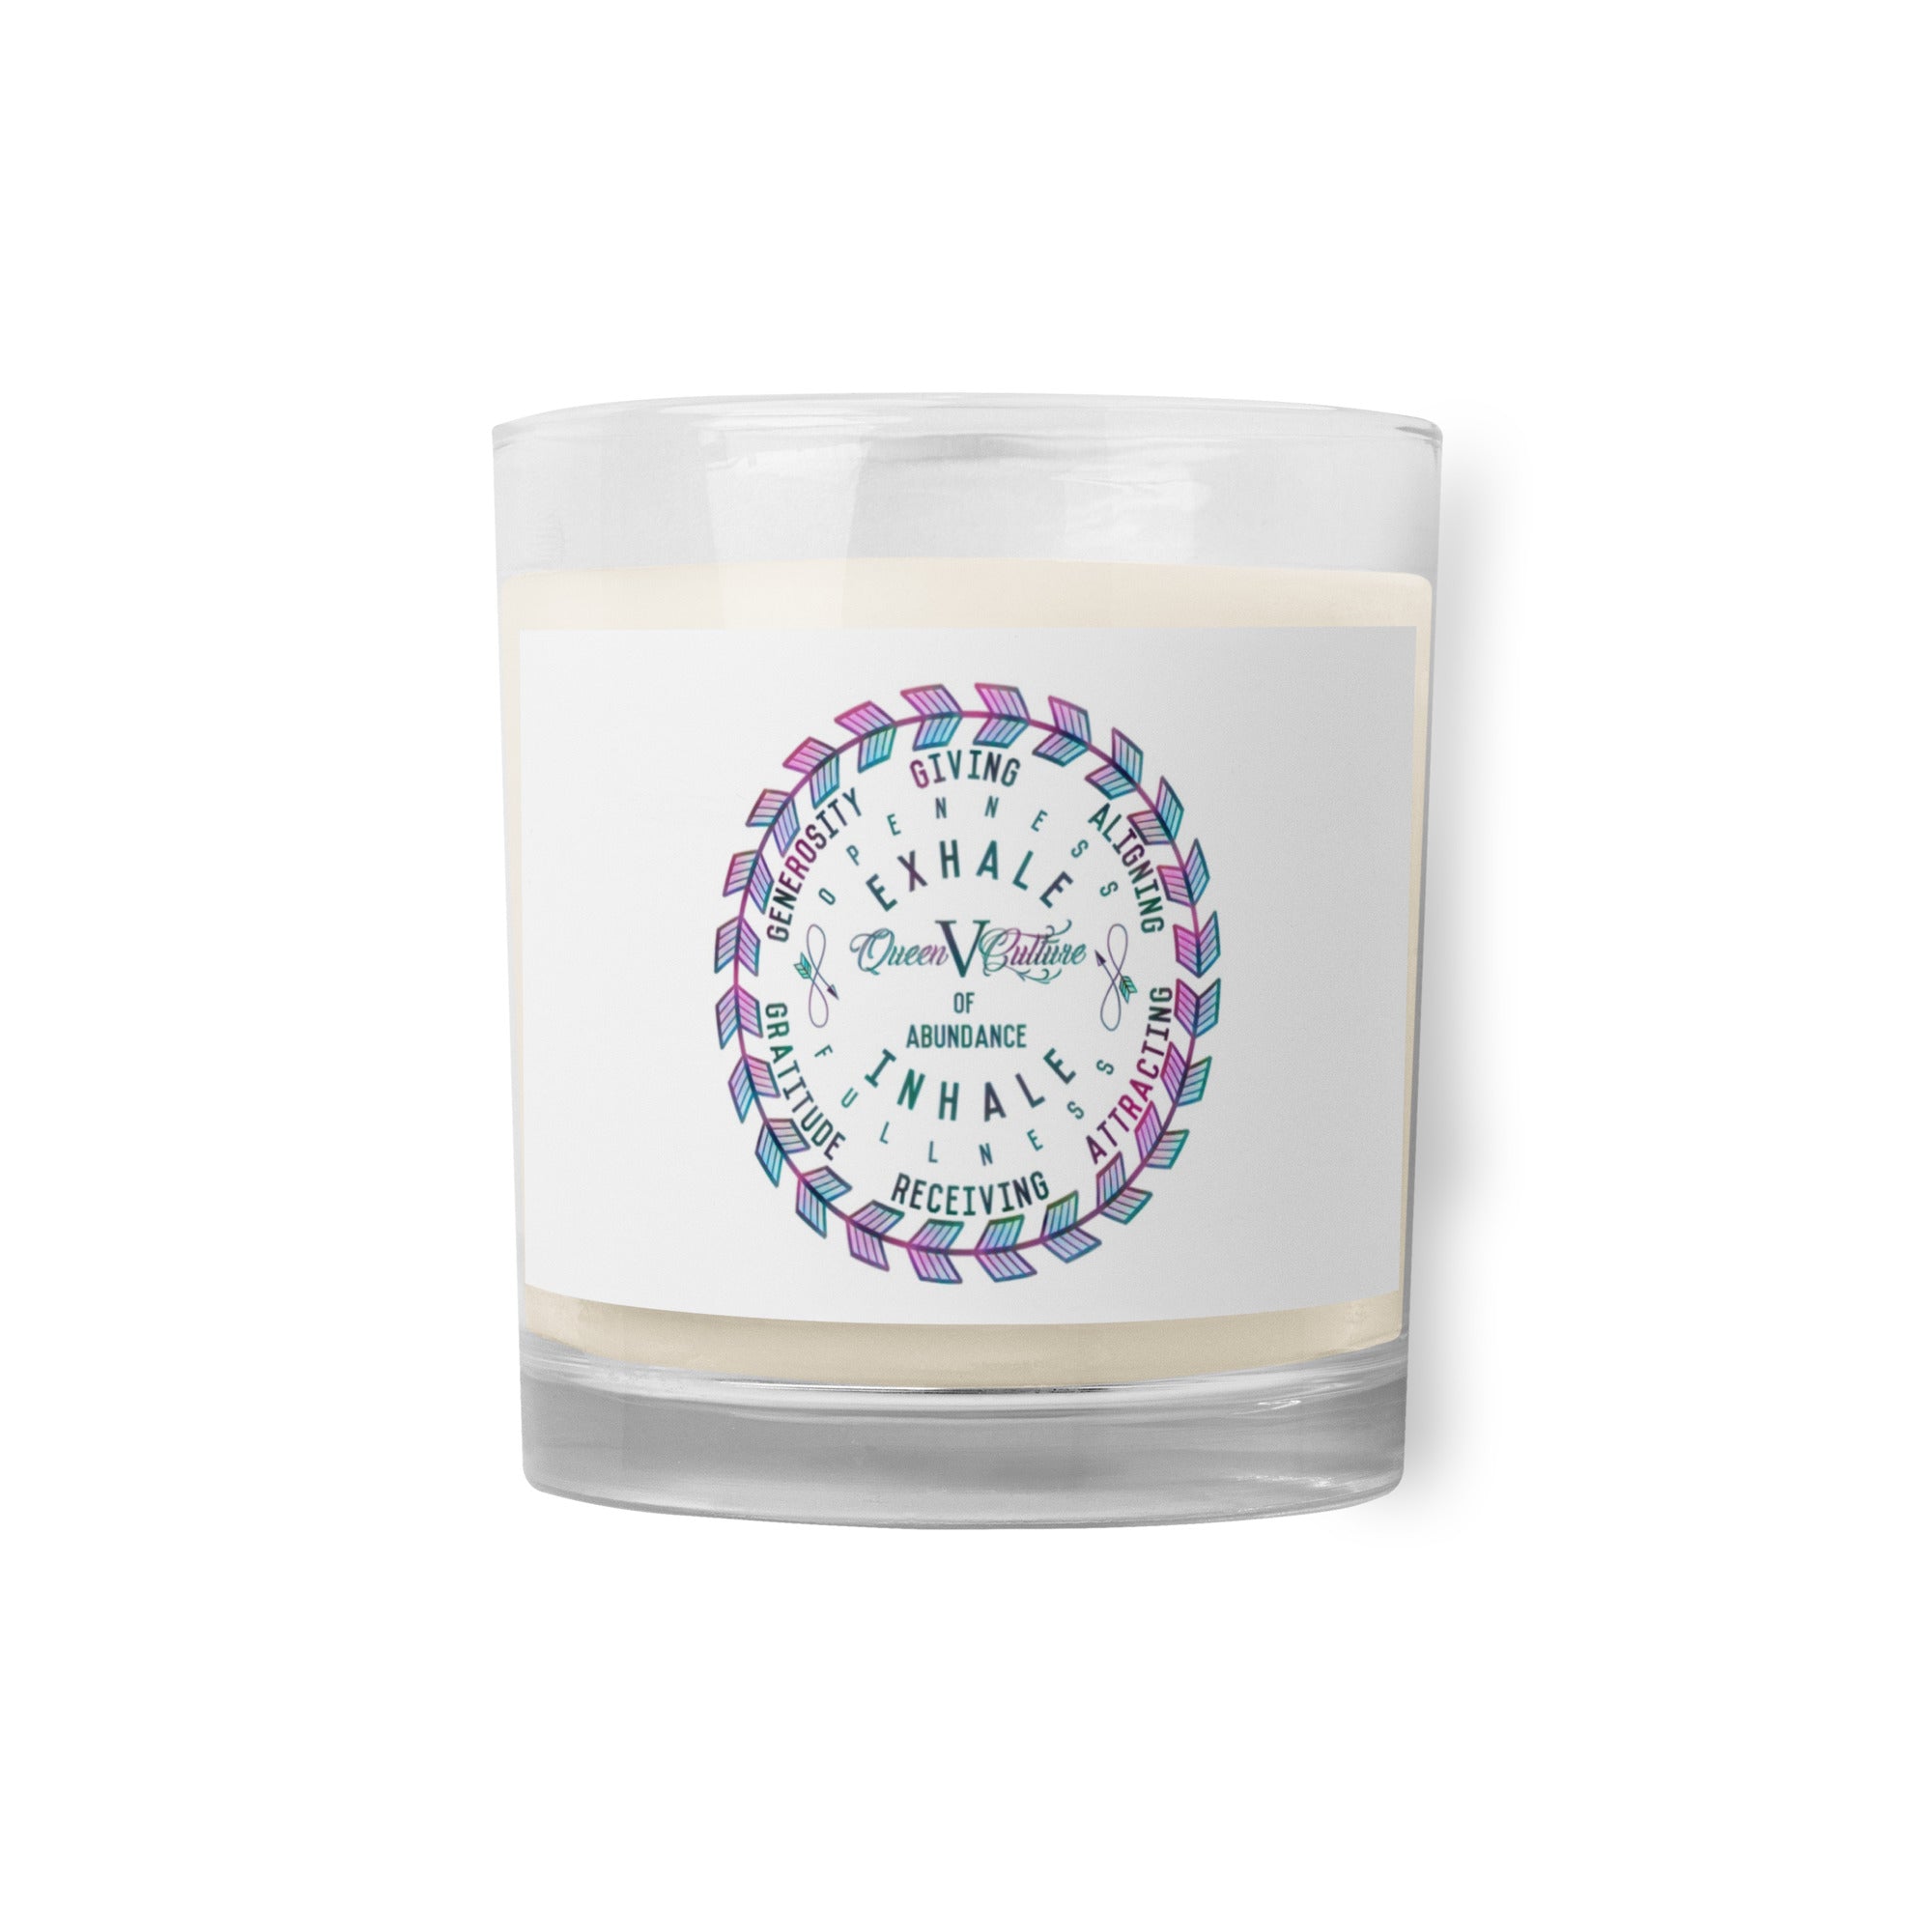 QueenVCulture Motto Glass Jar Soy Wax Candle